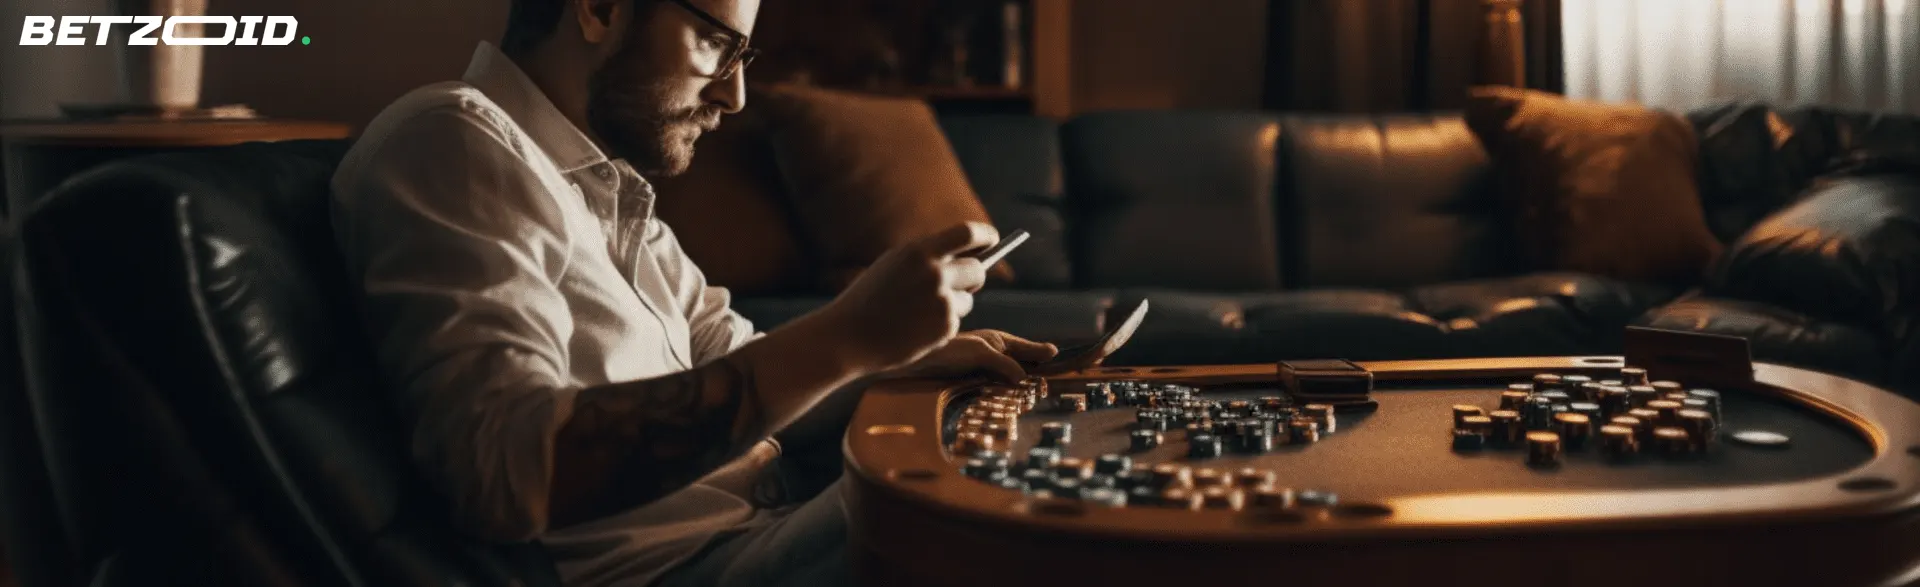 A man sitting on a couch, using a smartphone, with a poker table full of chips in front of him, representing mobile no deposit casino bonuses in Canada.